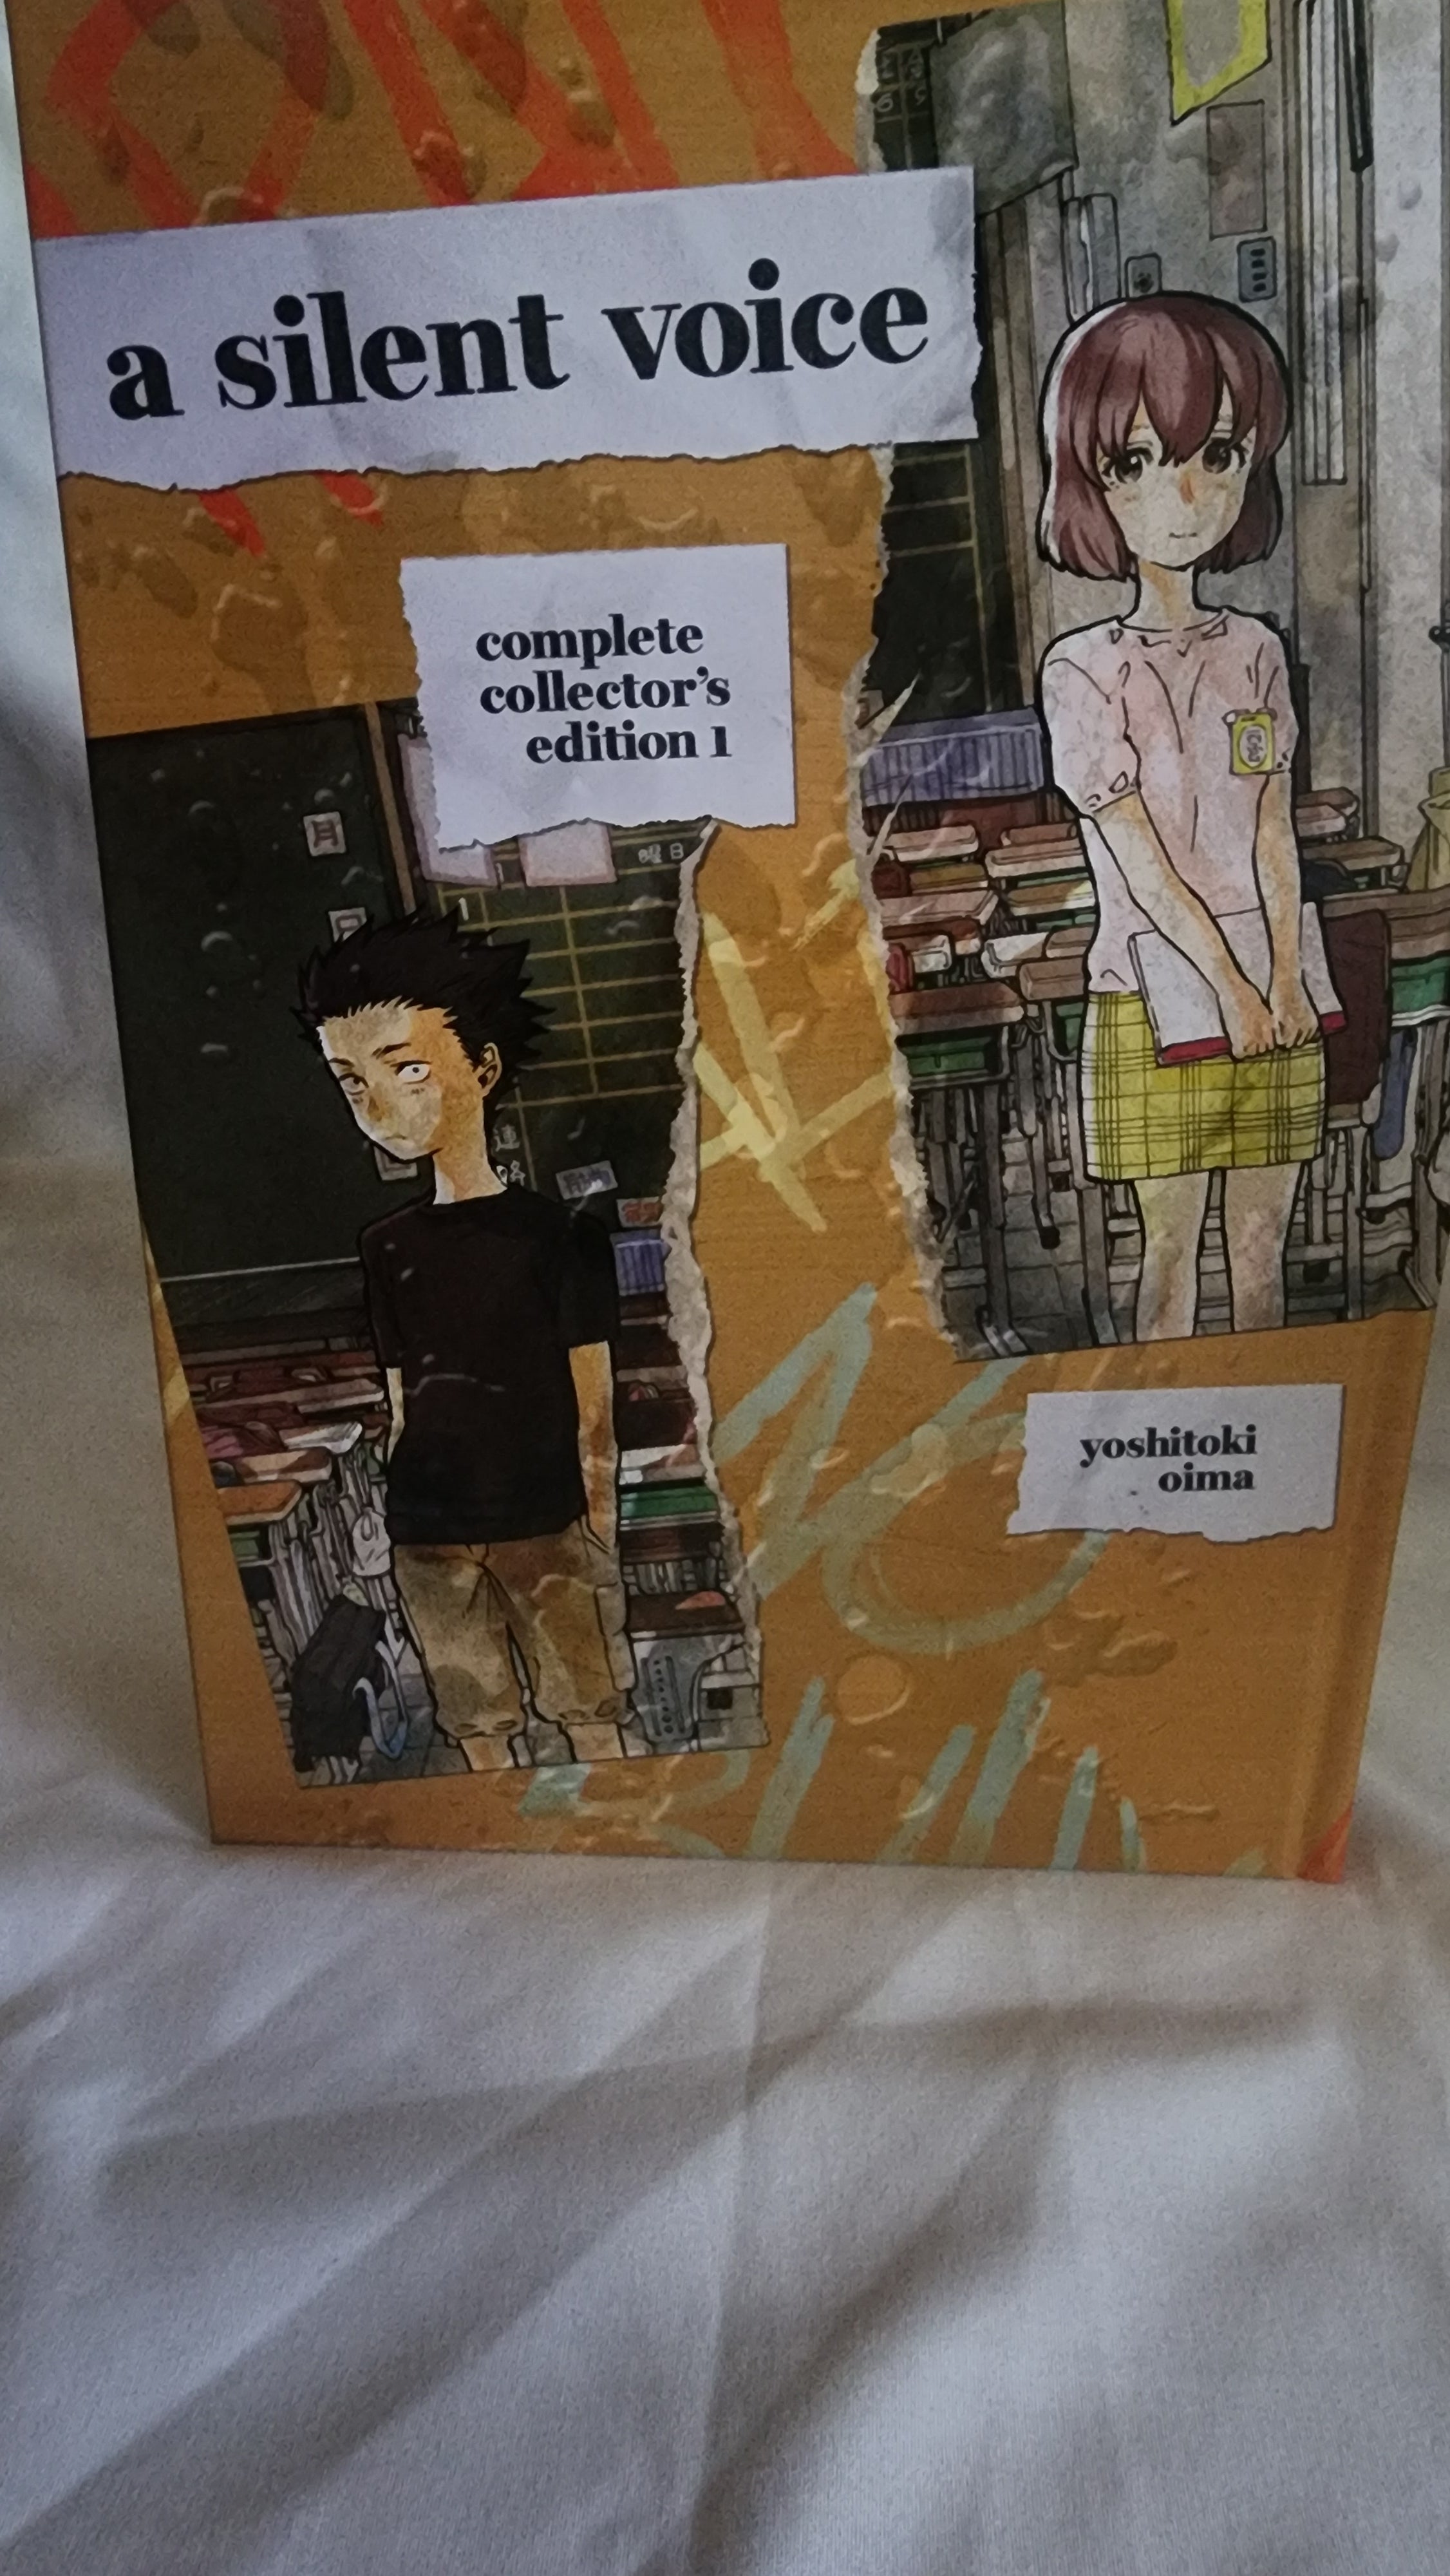 A Silent Voice Complete Collectors Edition Manga Volume 1 (Hardcover)